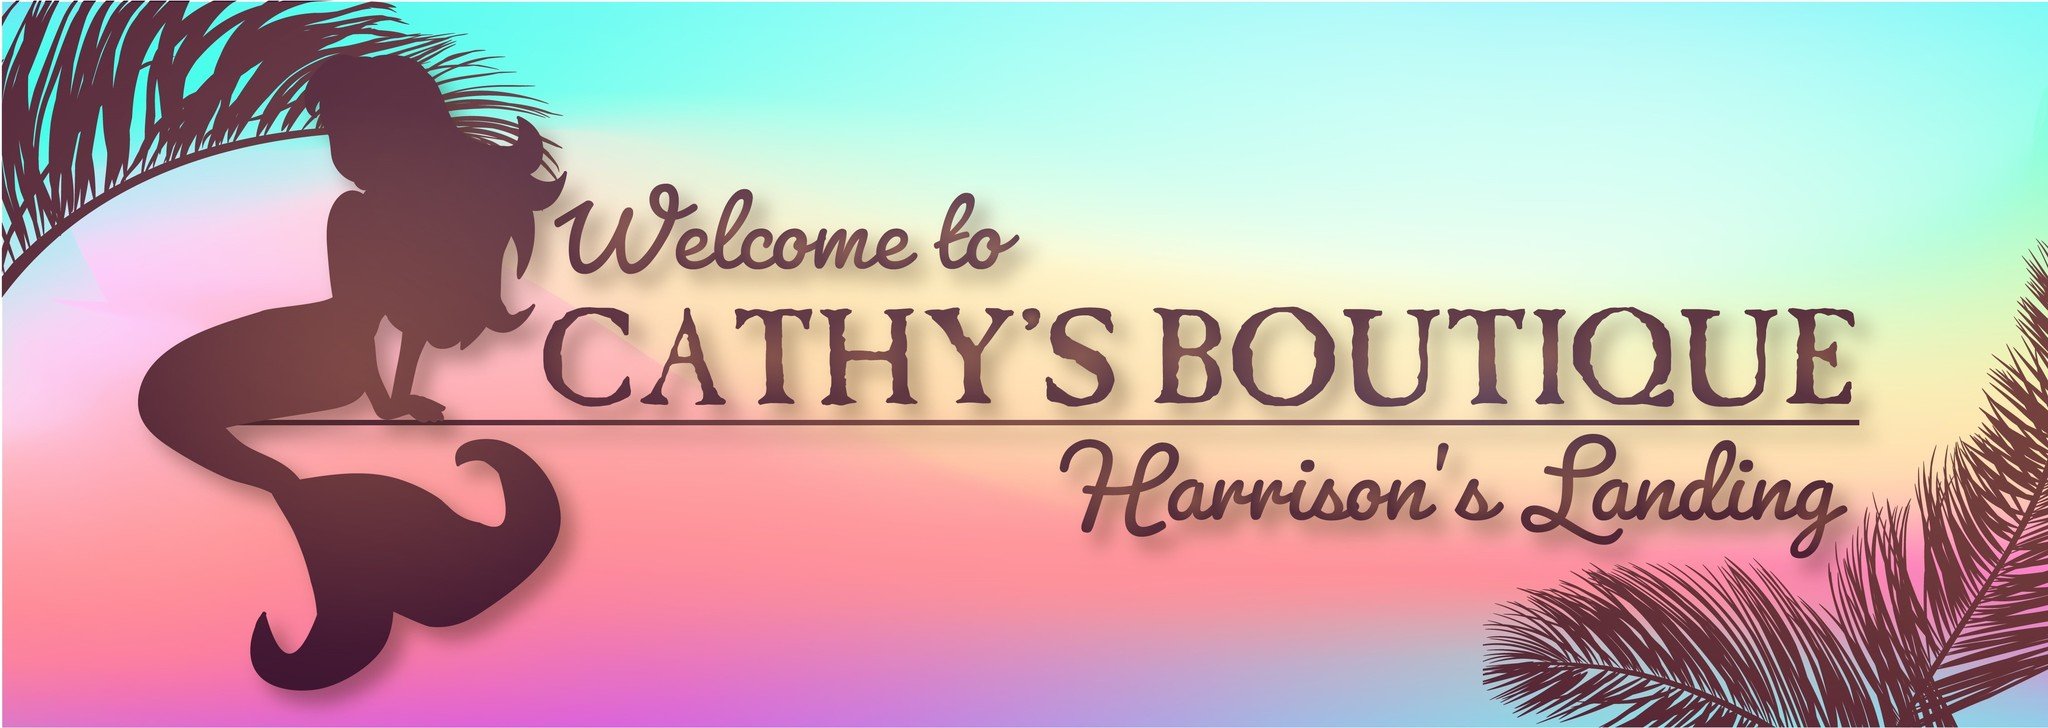 Welcome to Cathy's Boutique